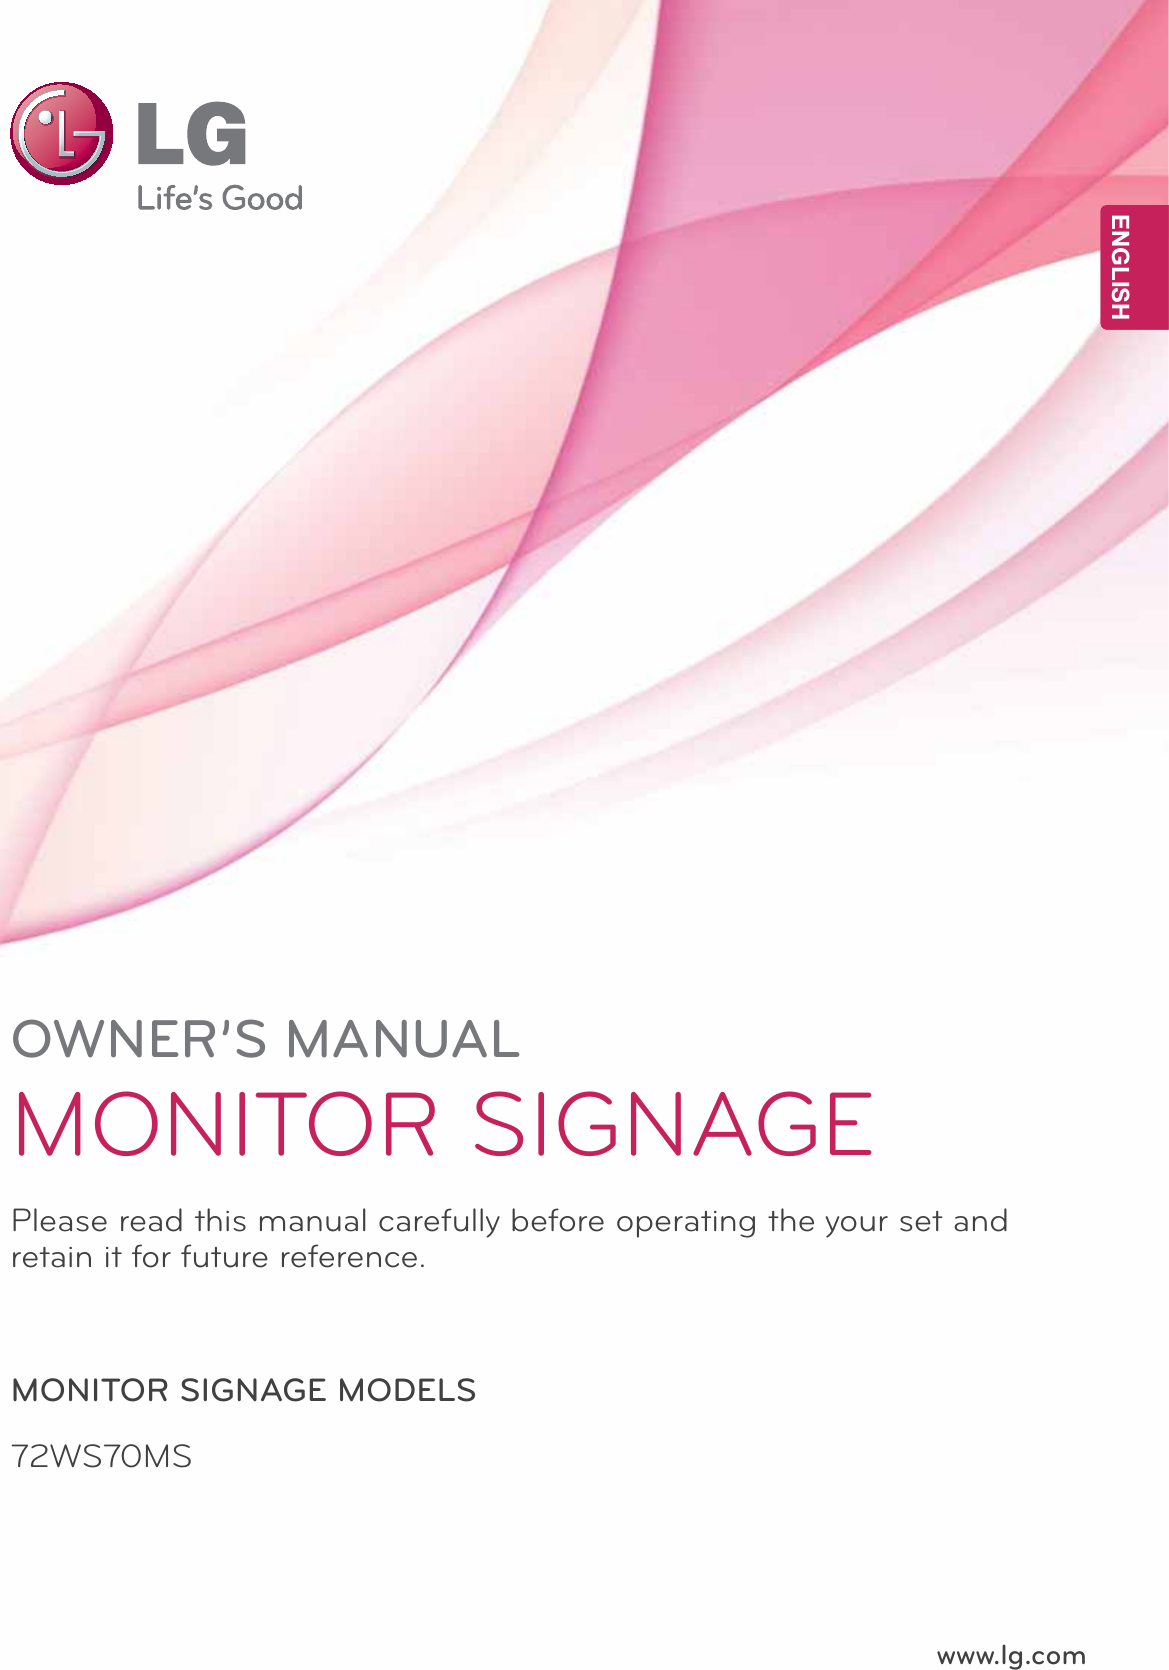 www.lg.comOWNER’S MANUALMONITOR SIGNAGE 72WS70MSPlease read this manual carefully before operating the your set and retain it for future reference.MONITOR SIGNAGE MODELS